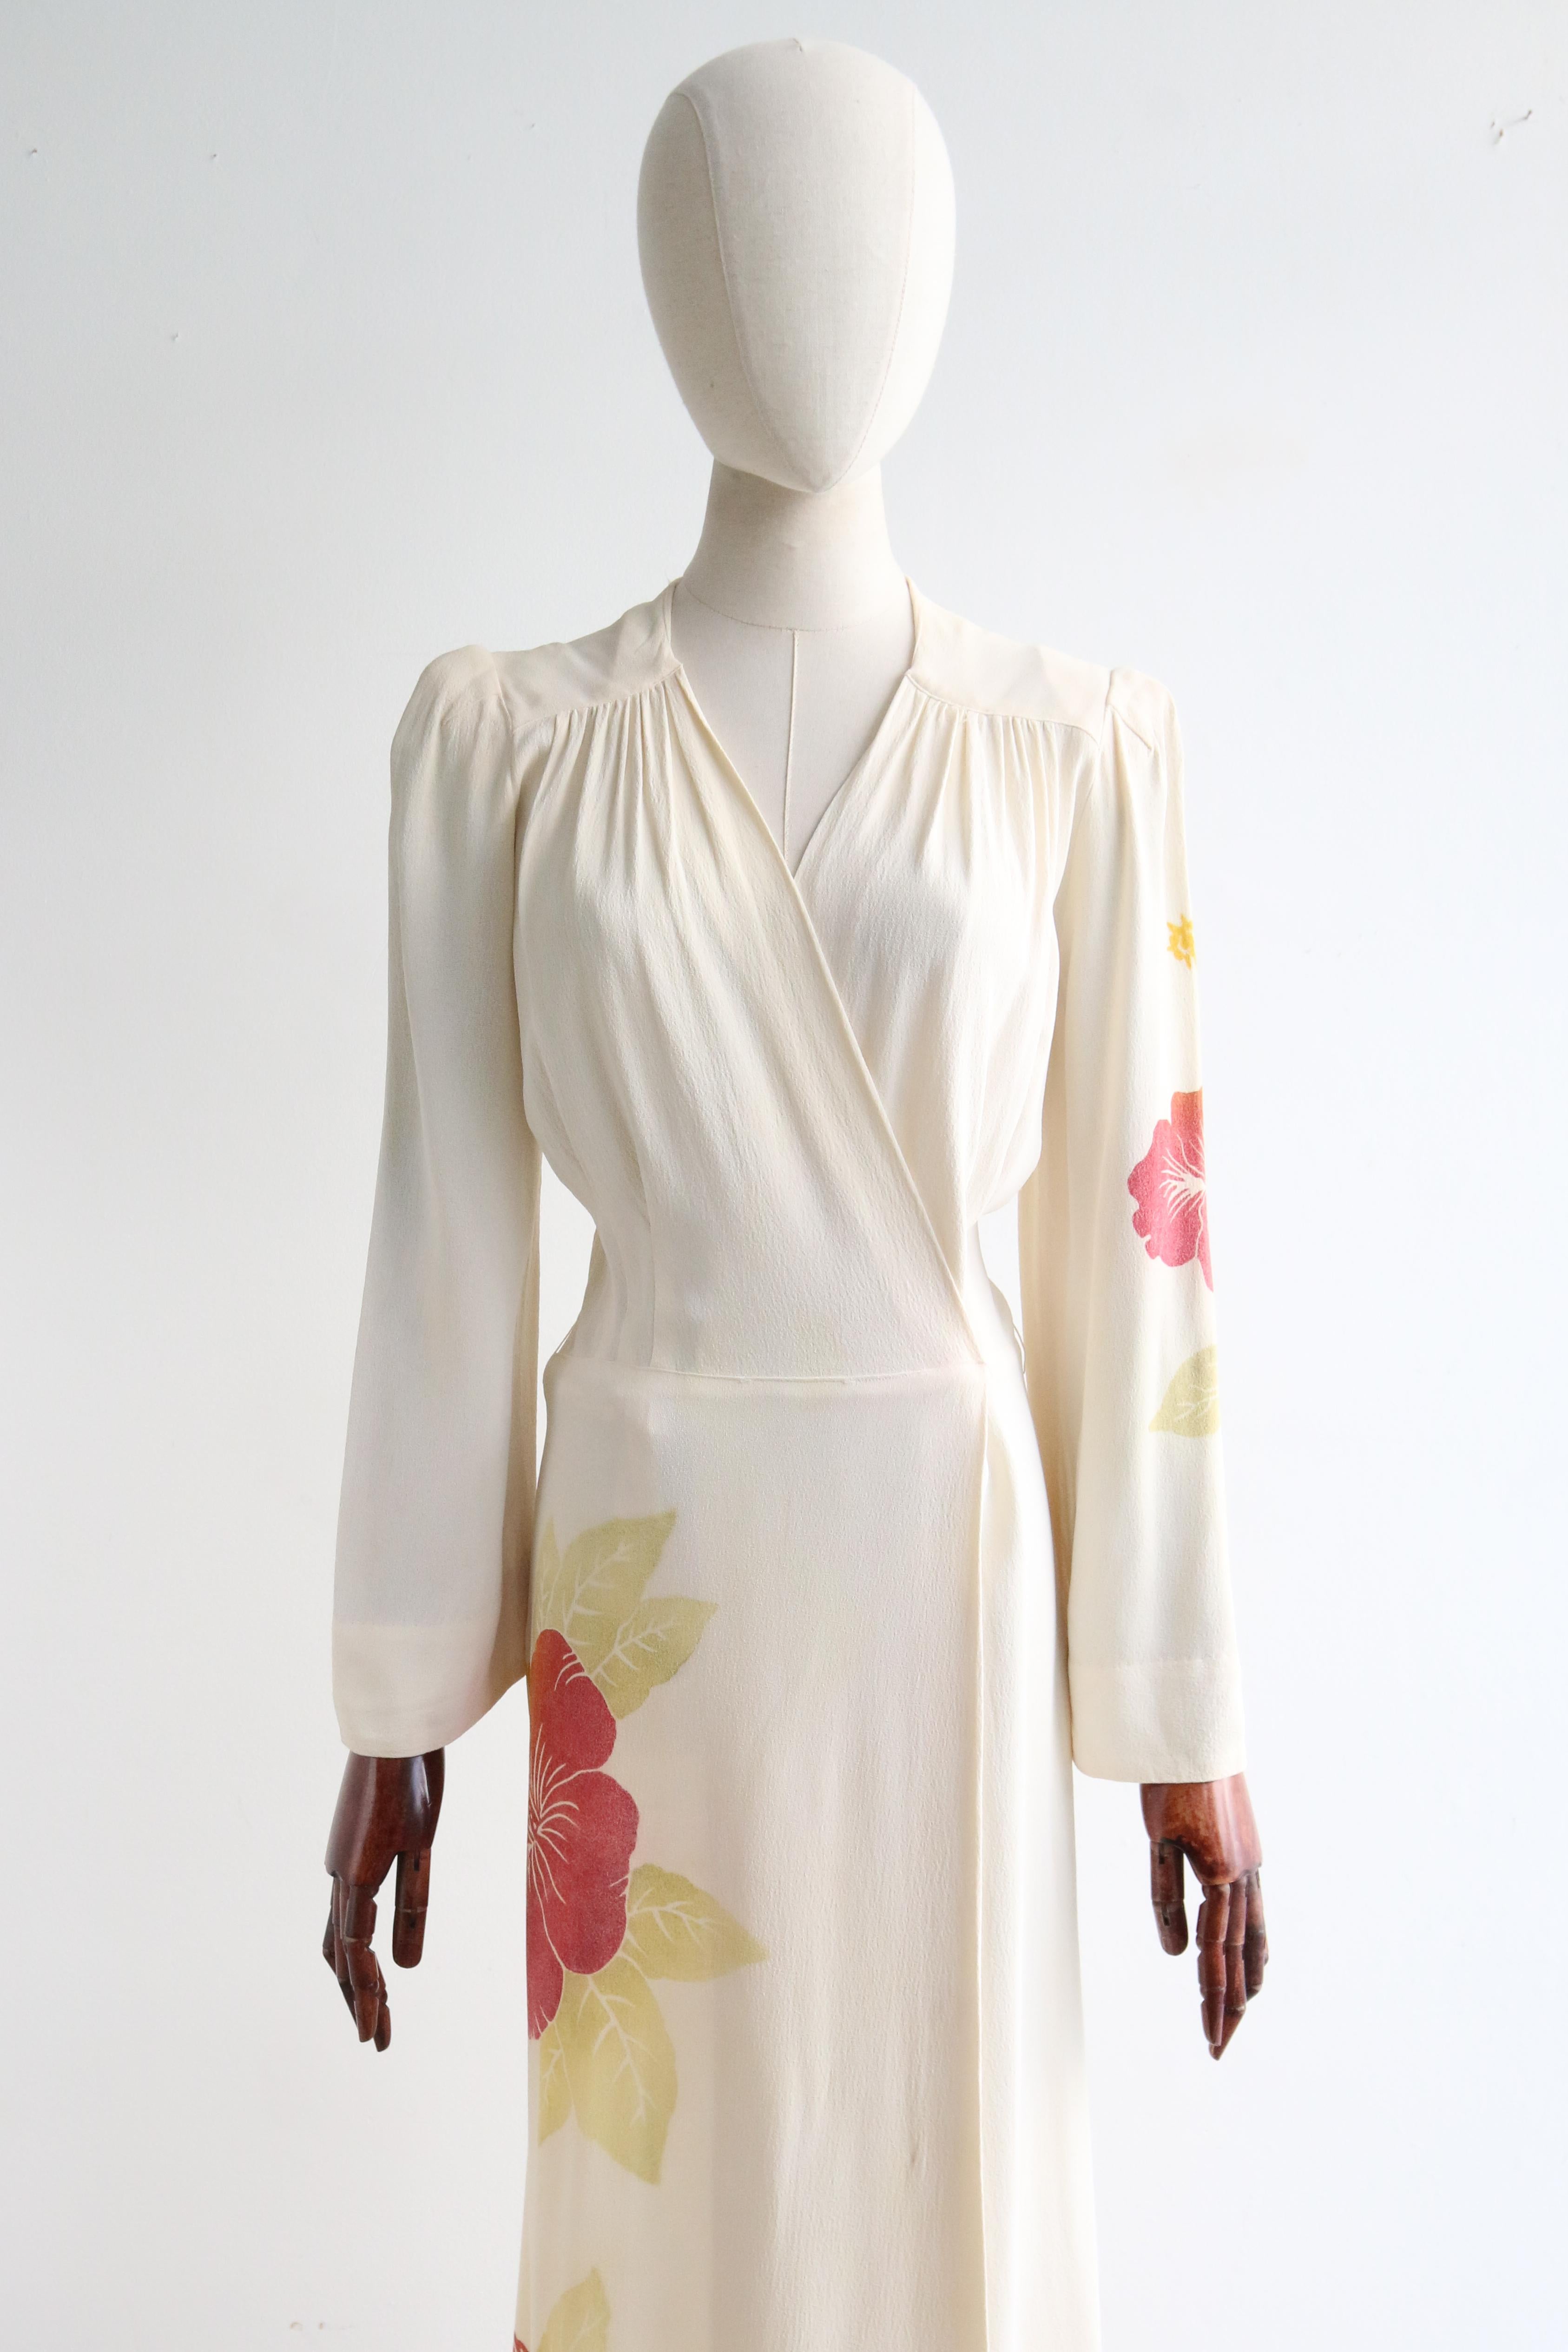 A beauty to behold. This original 1940's dress, rendered in a cream crepe silk, with a pattern of blooming hibiscus flowers in sunsets shades of reds, oranges and yellows, with green leaf accents, is just the piece for that special occasion. 

The